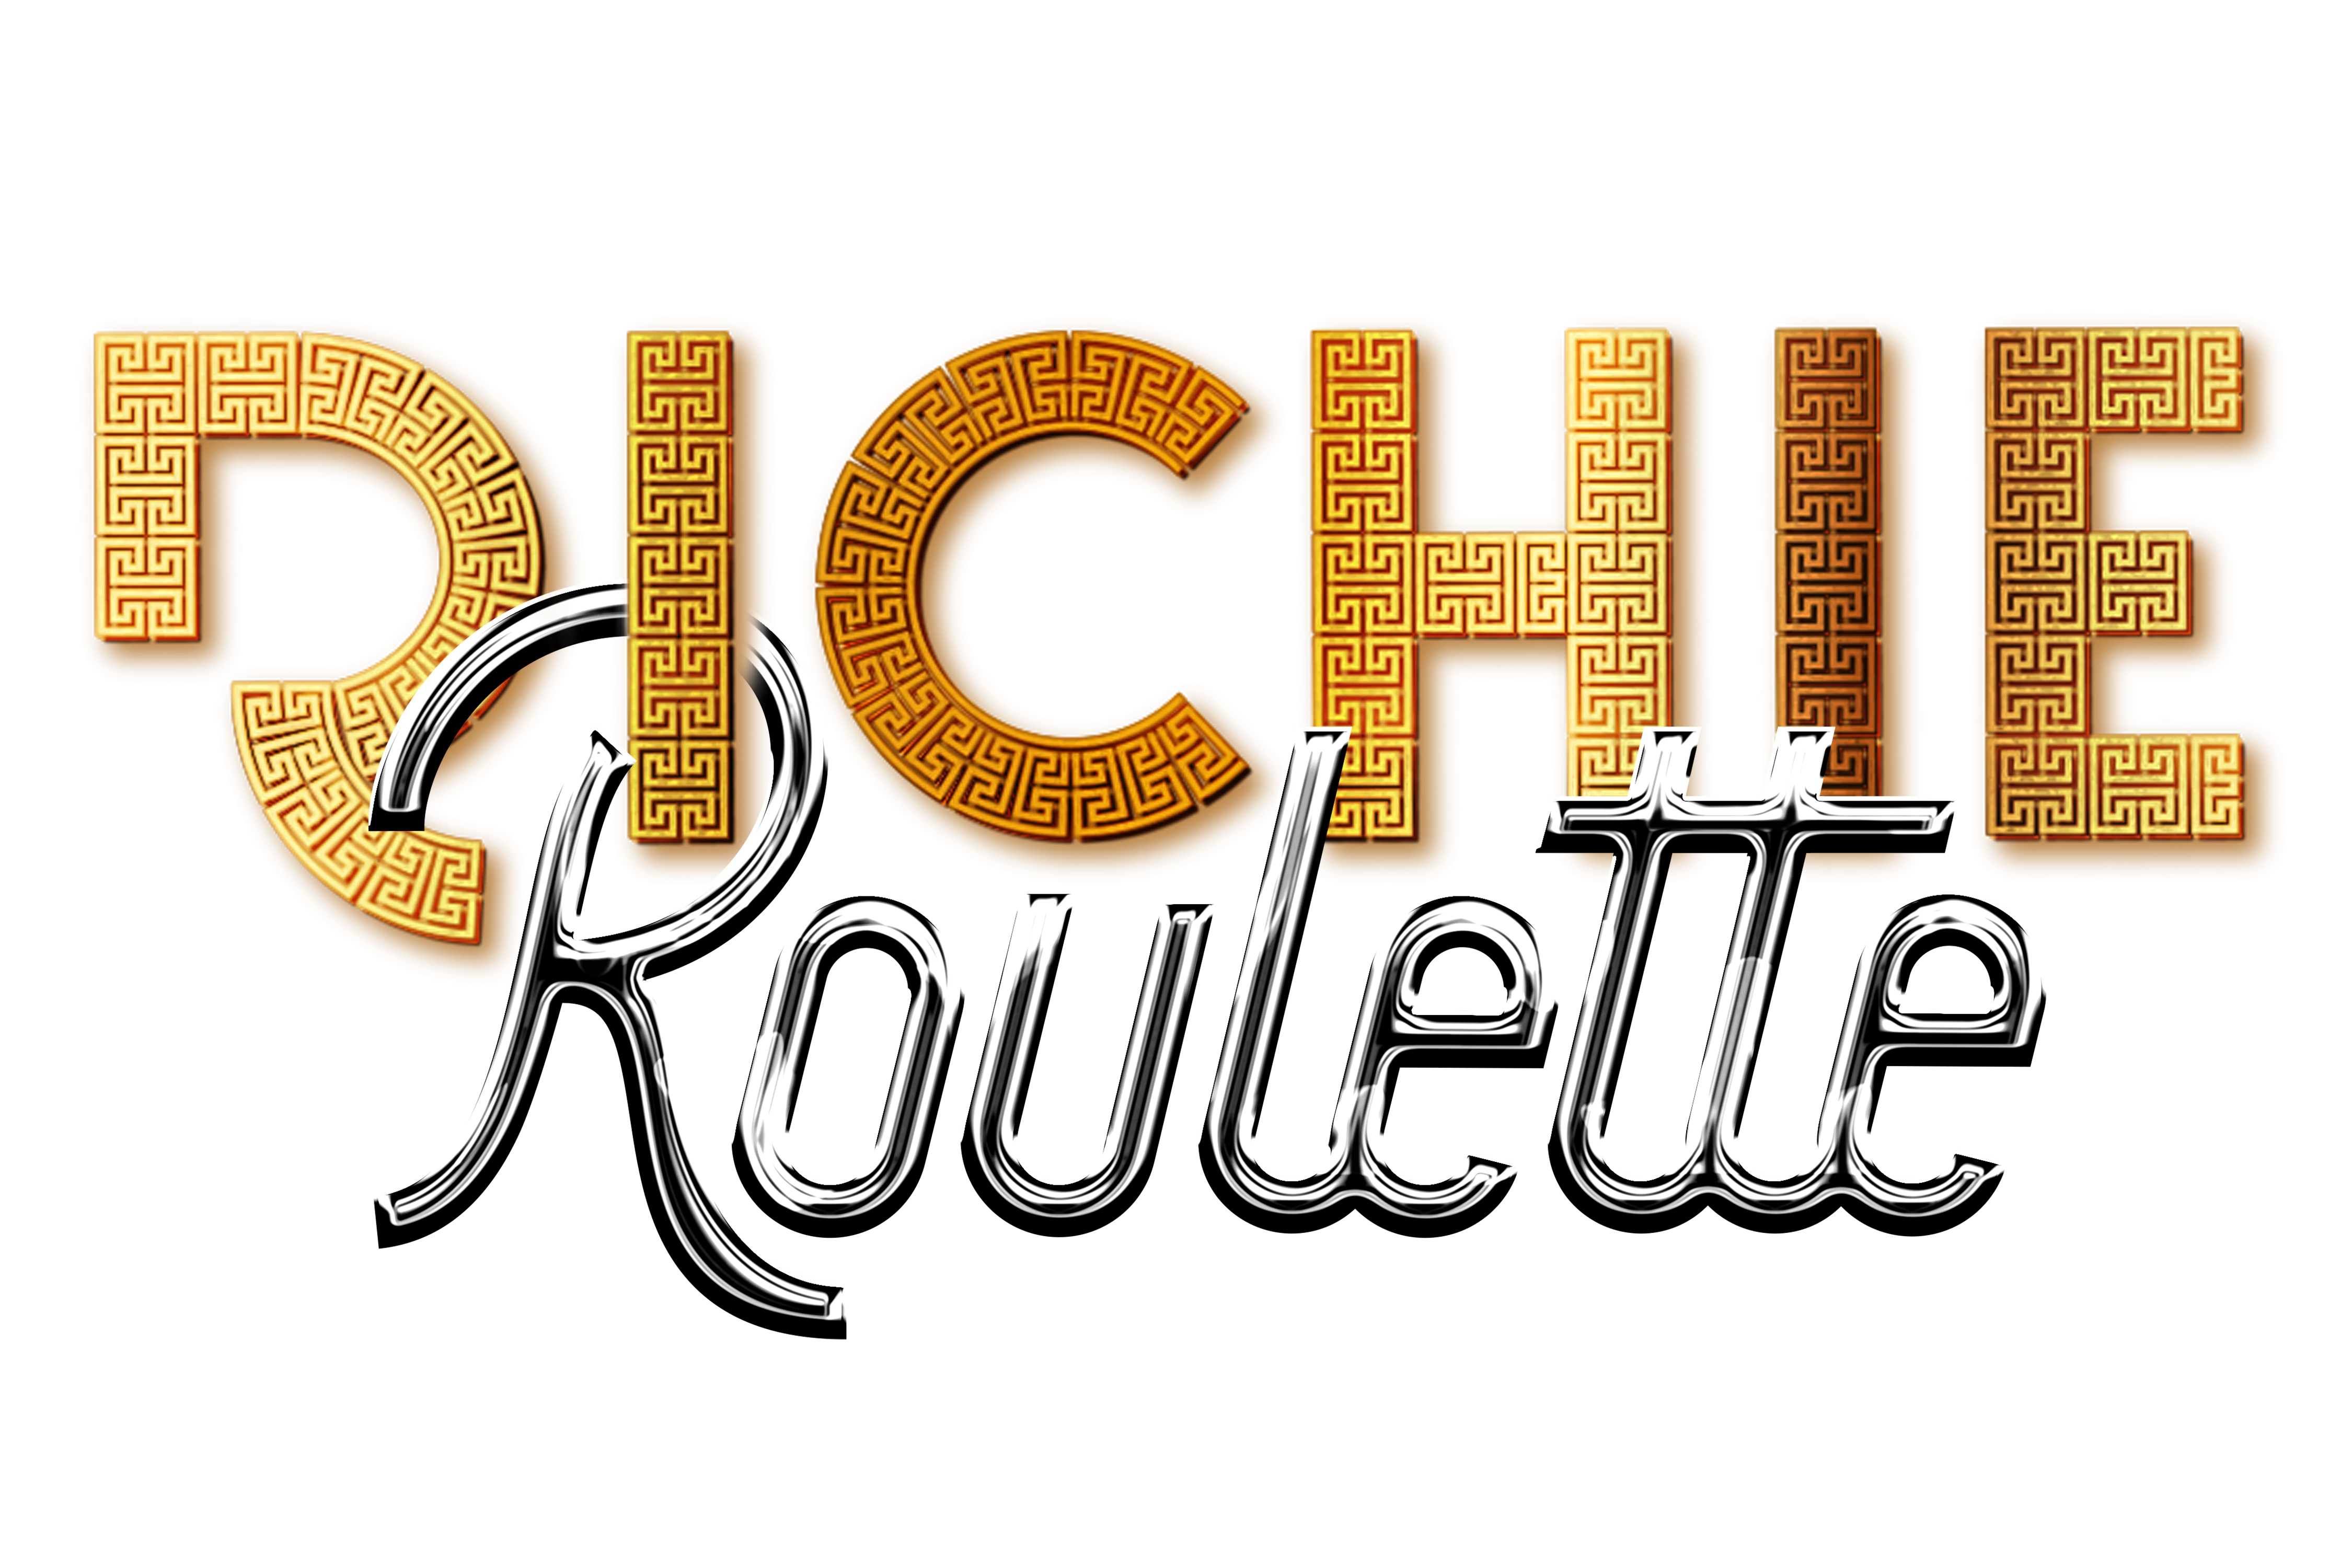 2120-richie-roulette-redesign-16910462792043.png